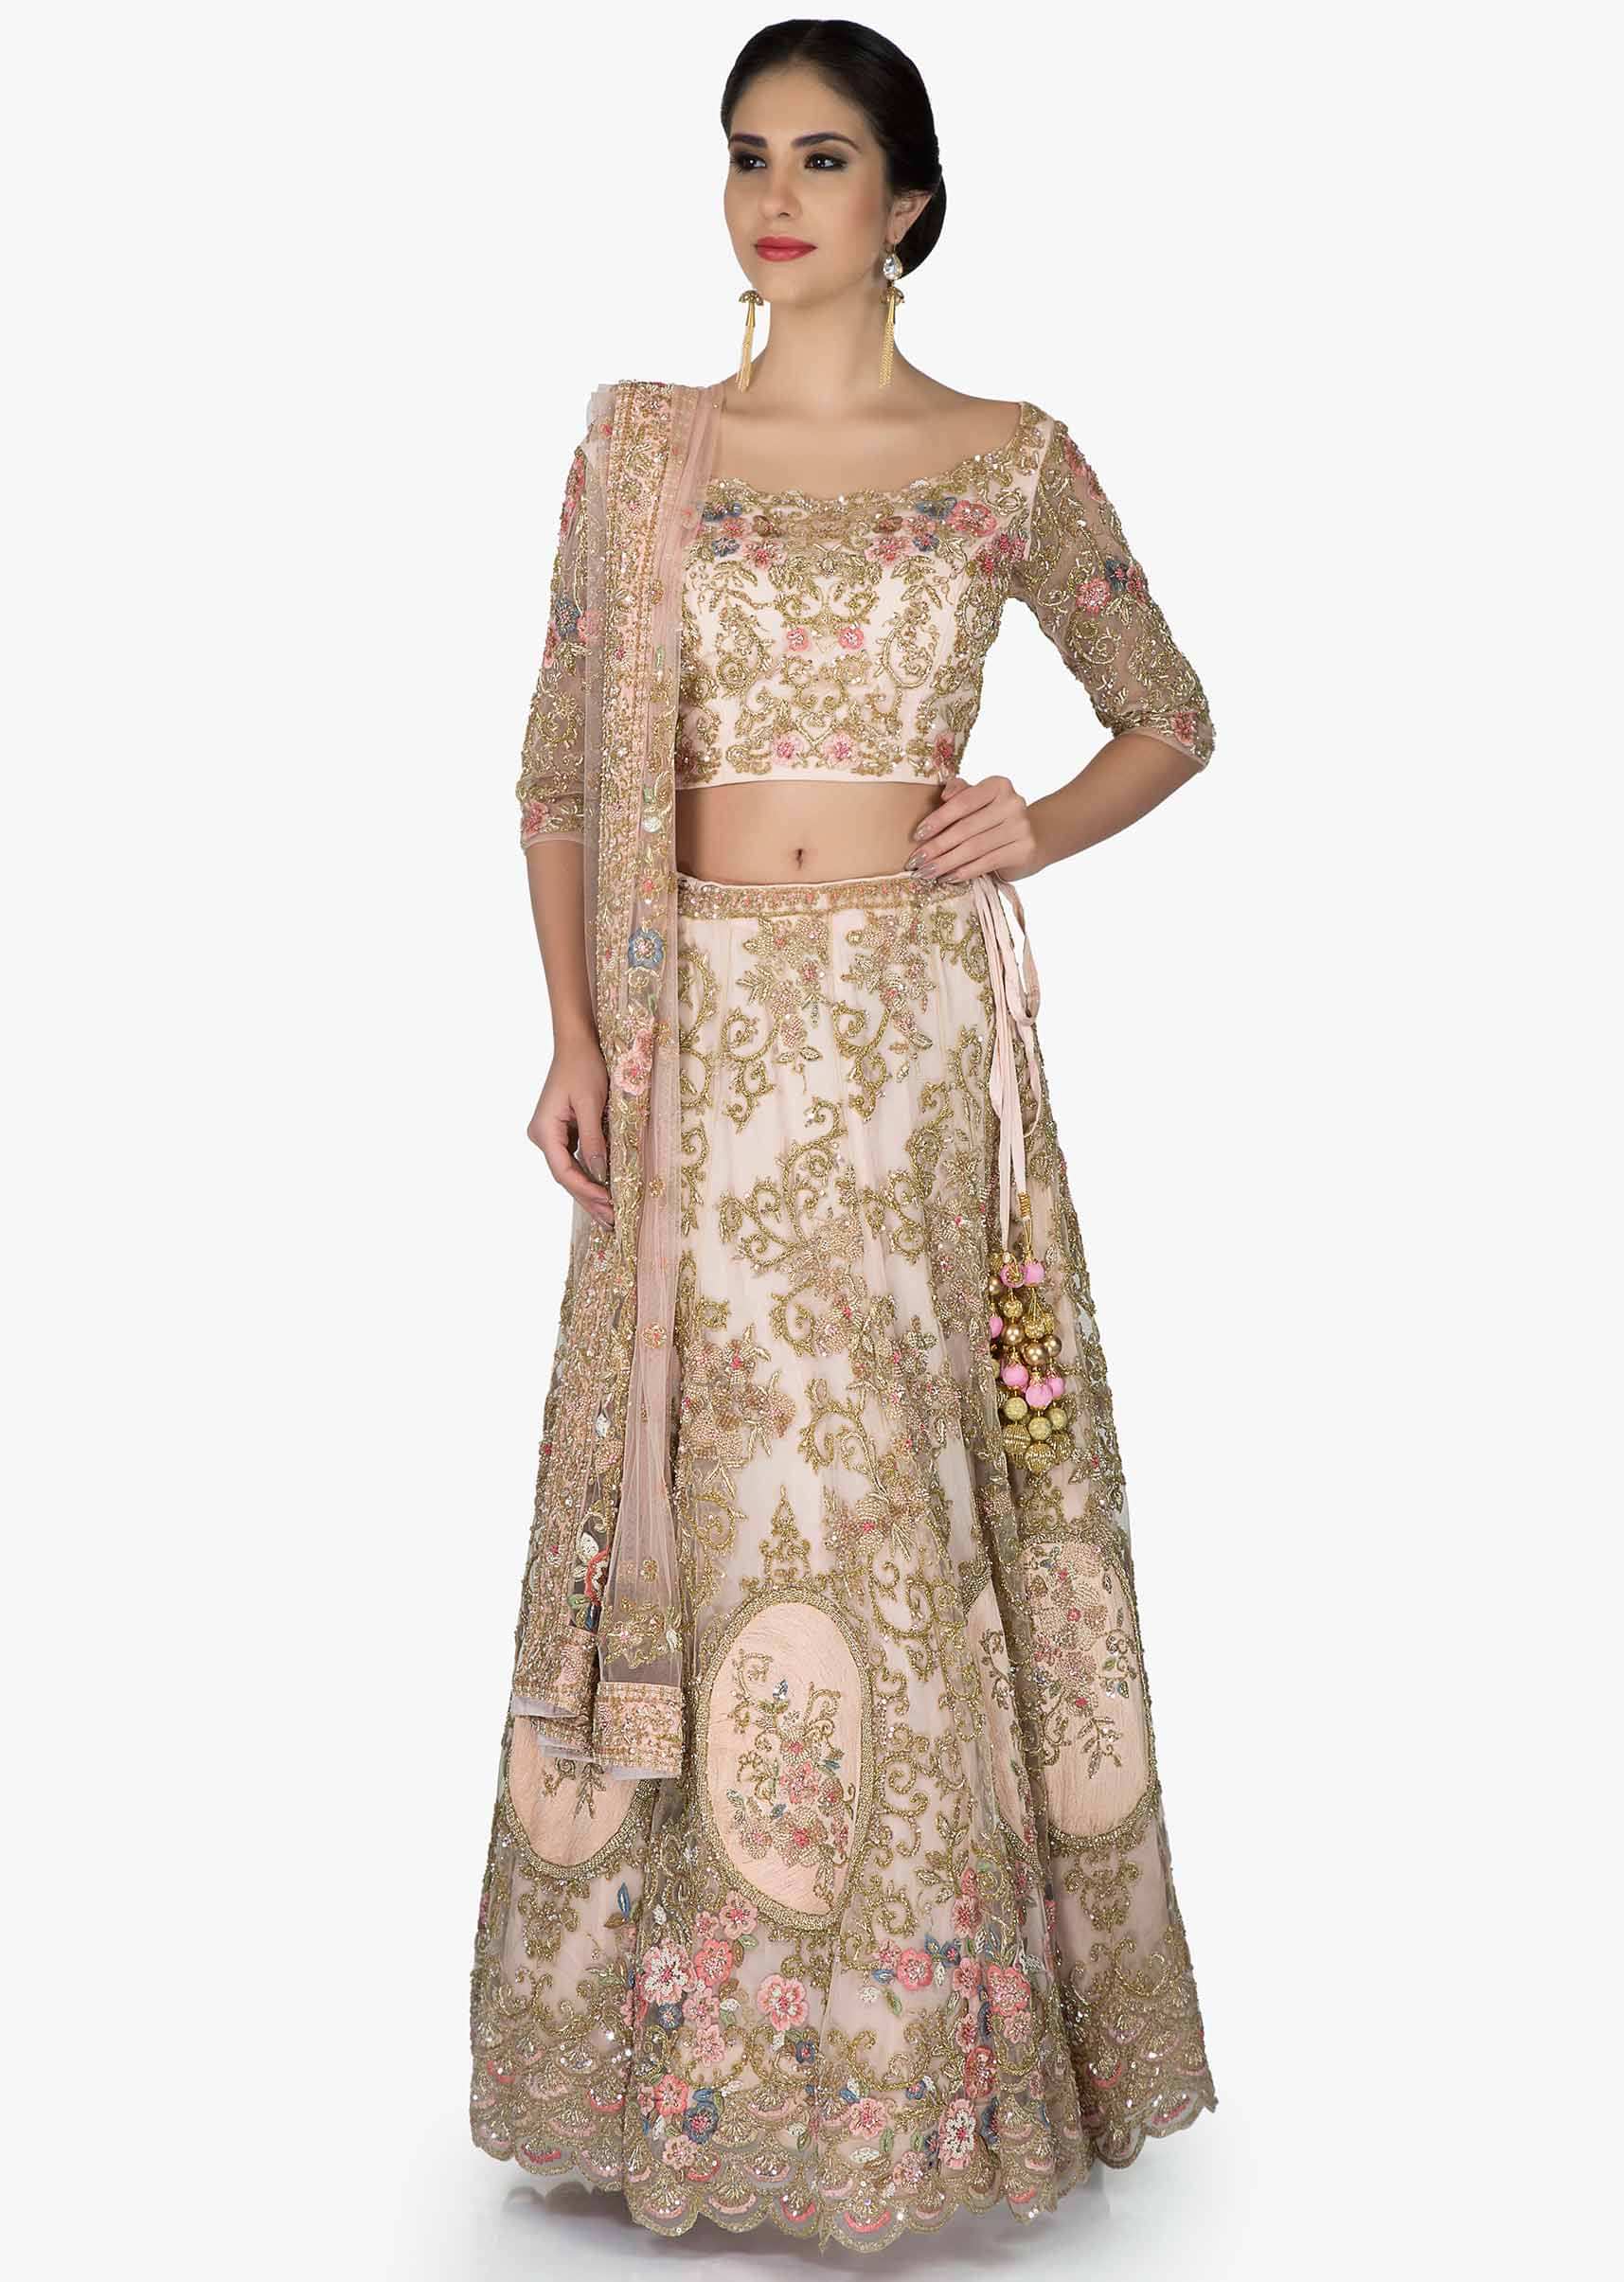 Cream Silk Lehenga Blouse Ensemble Crafted with Floral Embroidered Motifs only on Kalki